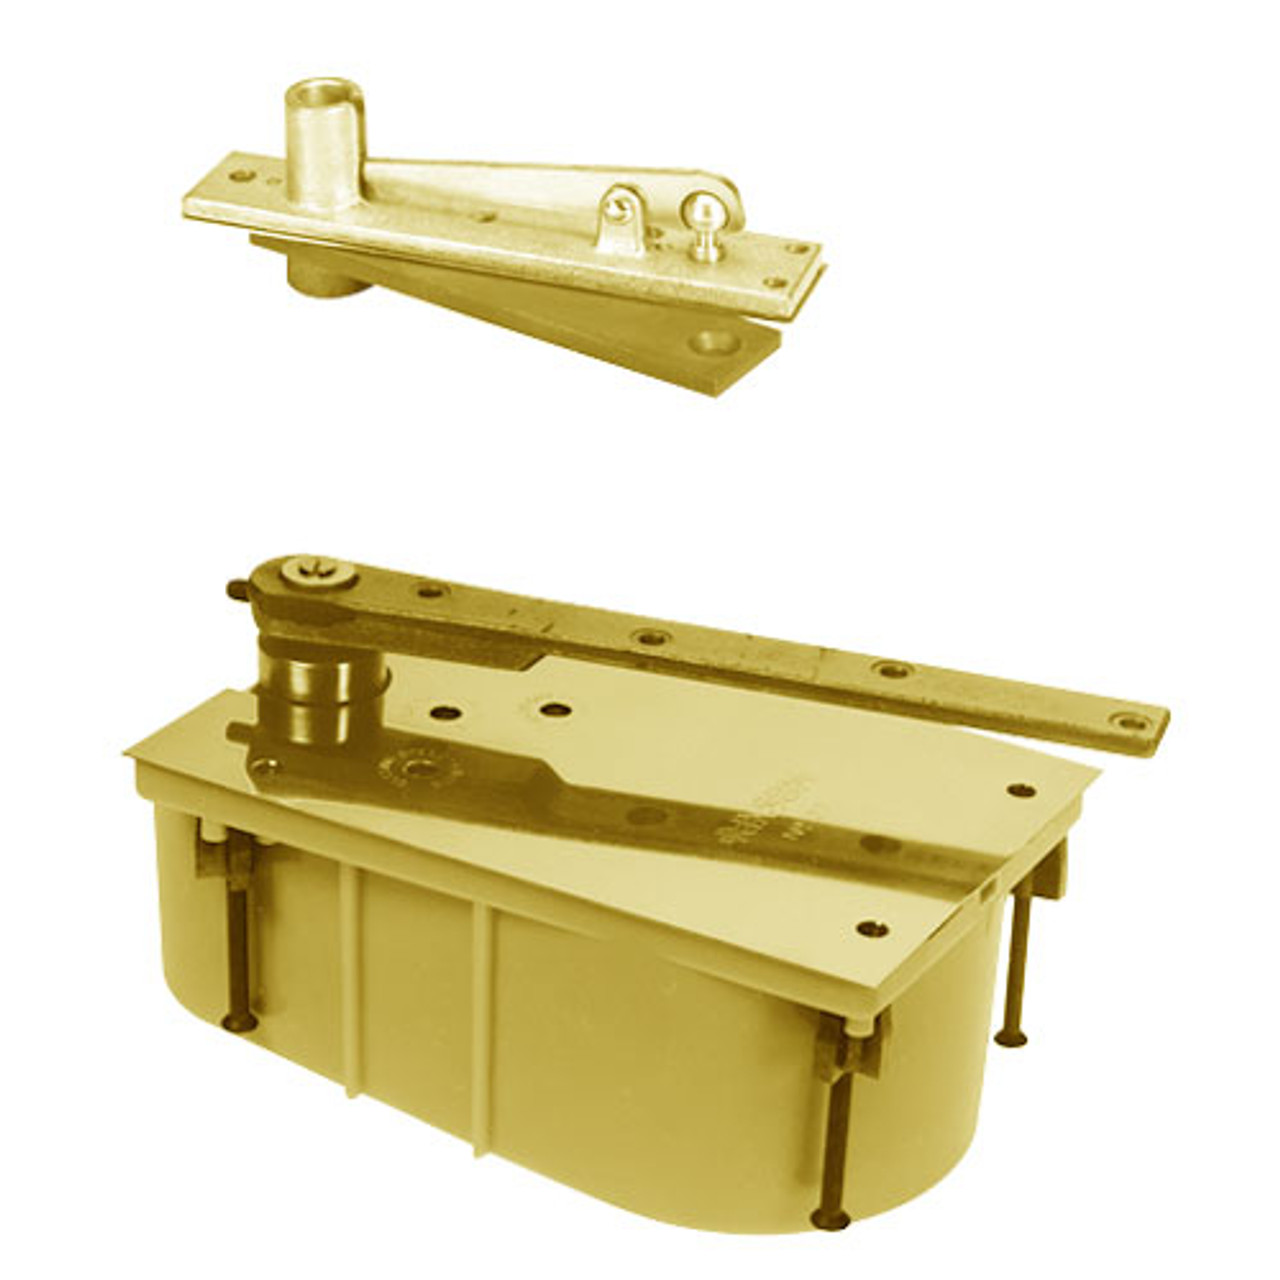 PH28-105S-554-CWF-LH-605 Rixson 28 Series Heavy Duty Single Acting Center Hung Floor Closer with Concealed Arm in Bright Brass Finish